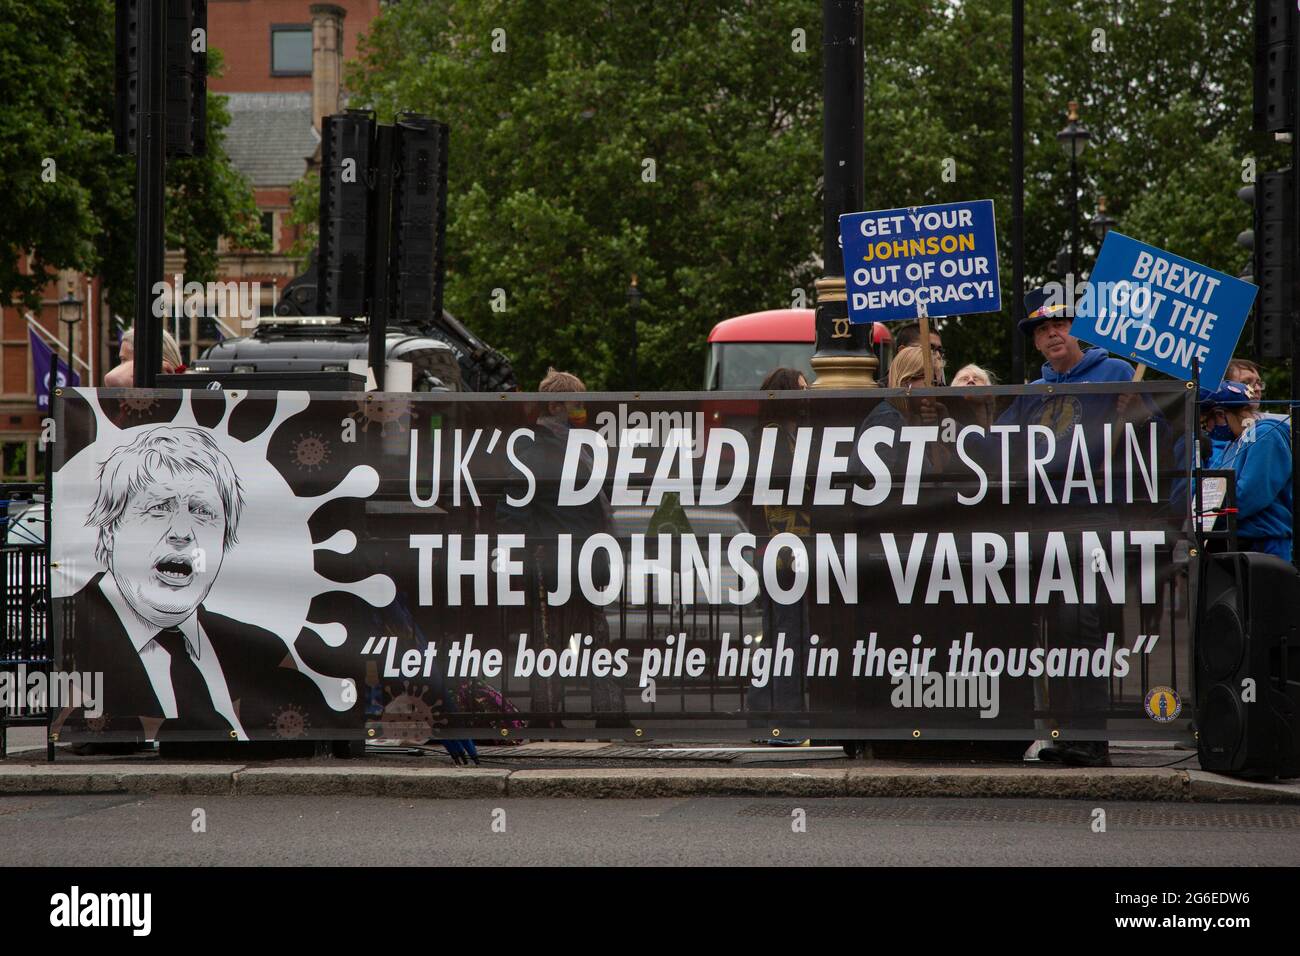 'UK's deadliest strain - the Johnson variant'  - Protesters from the group Sodem Action lead by Pro EU activist Steve Bray staging a protest on Whiteh Stock Photo